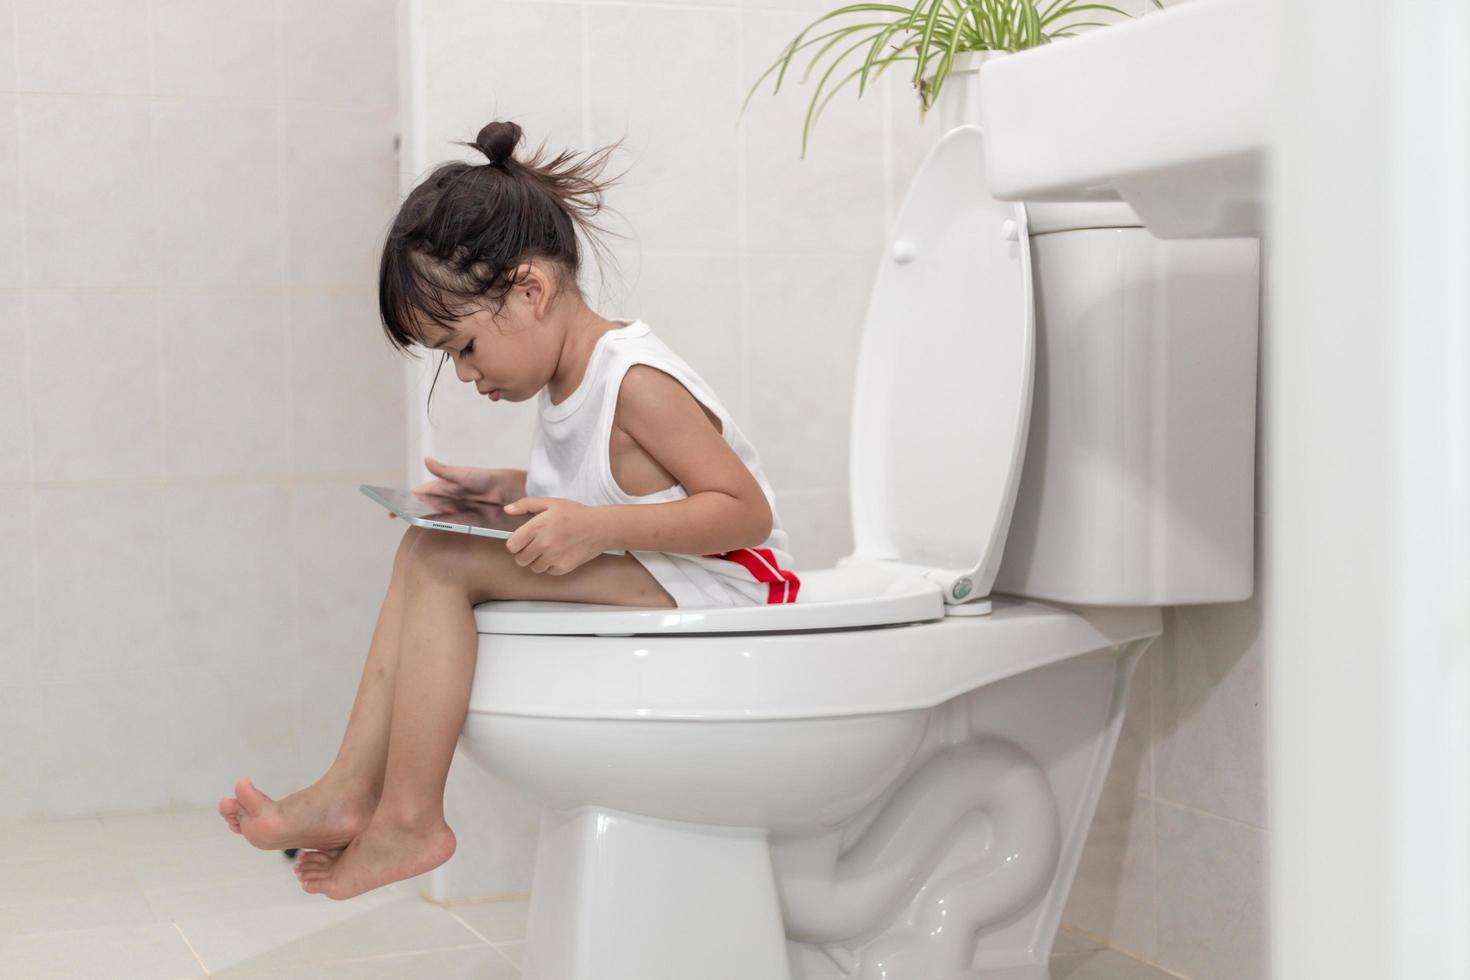 child sitting on the toilet holding the tablet.child addicted smartphone concept photo